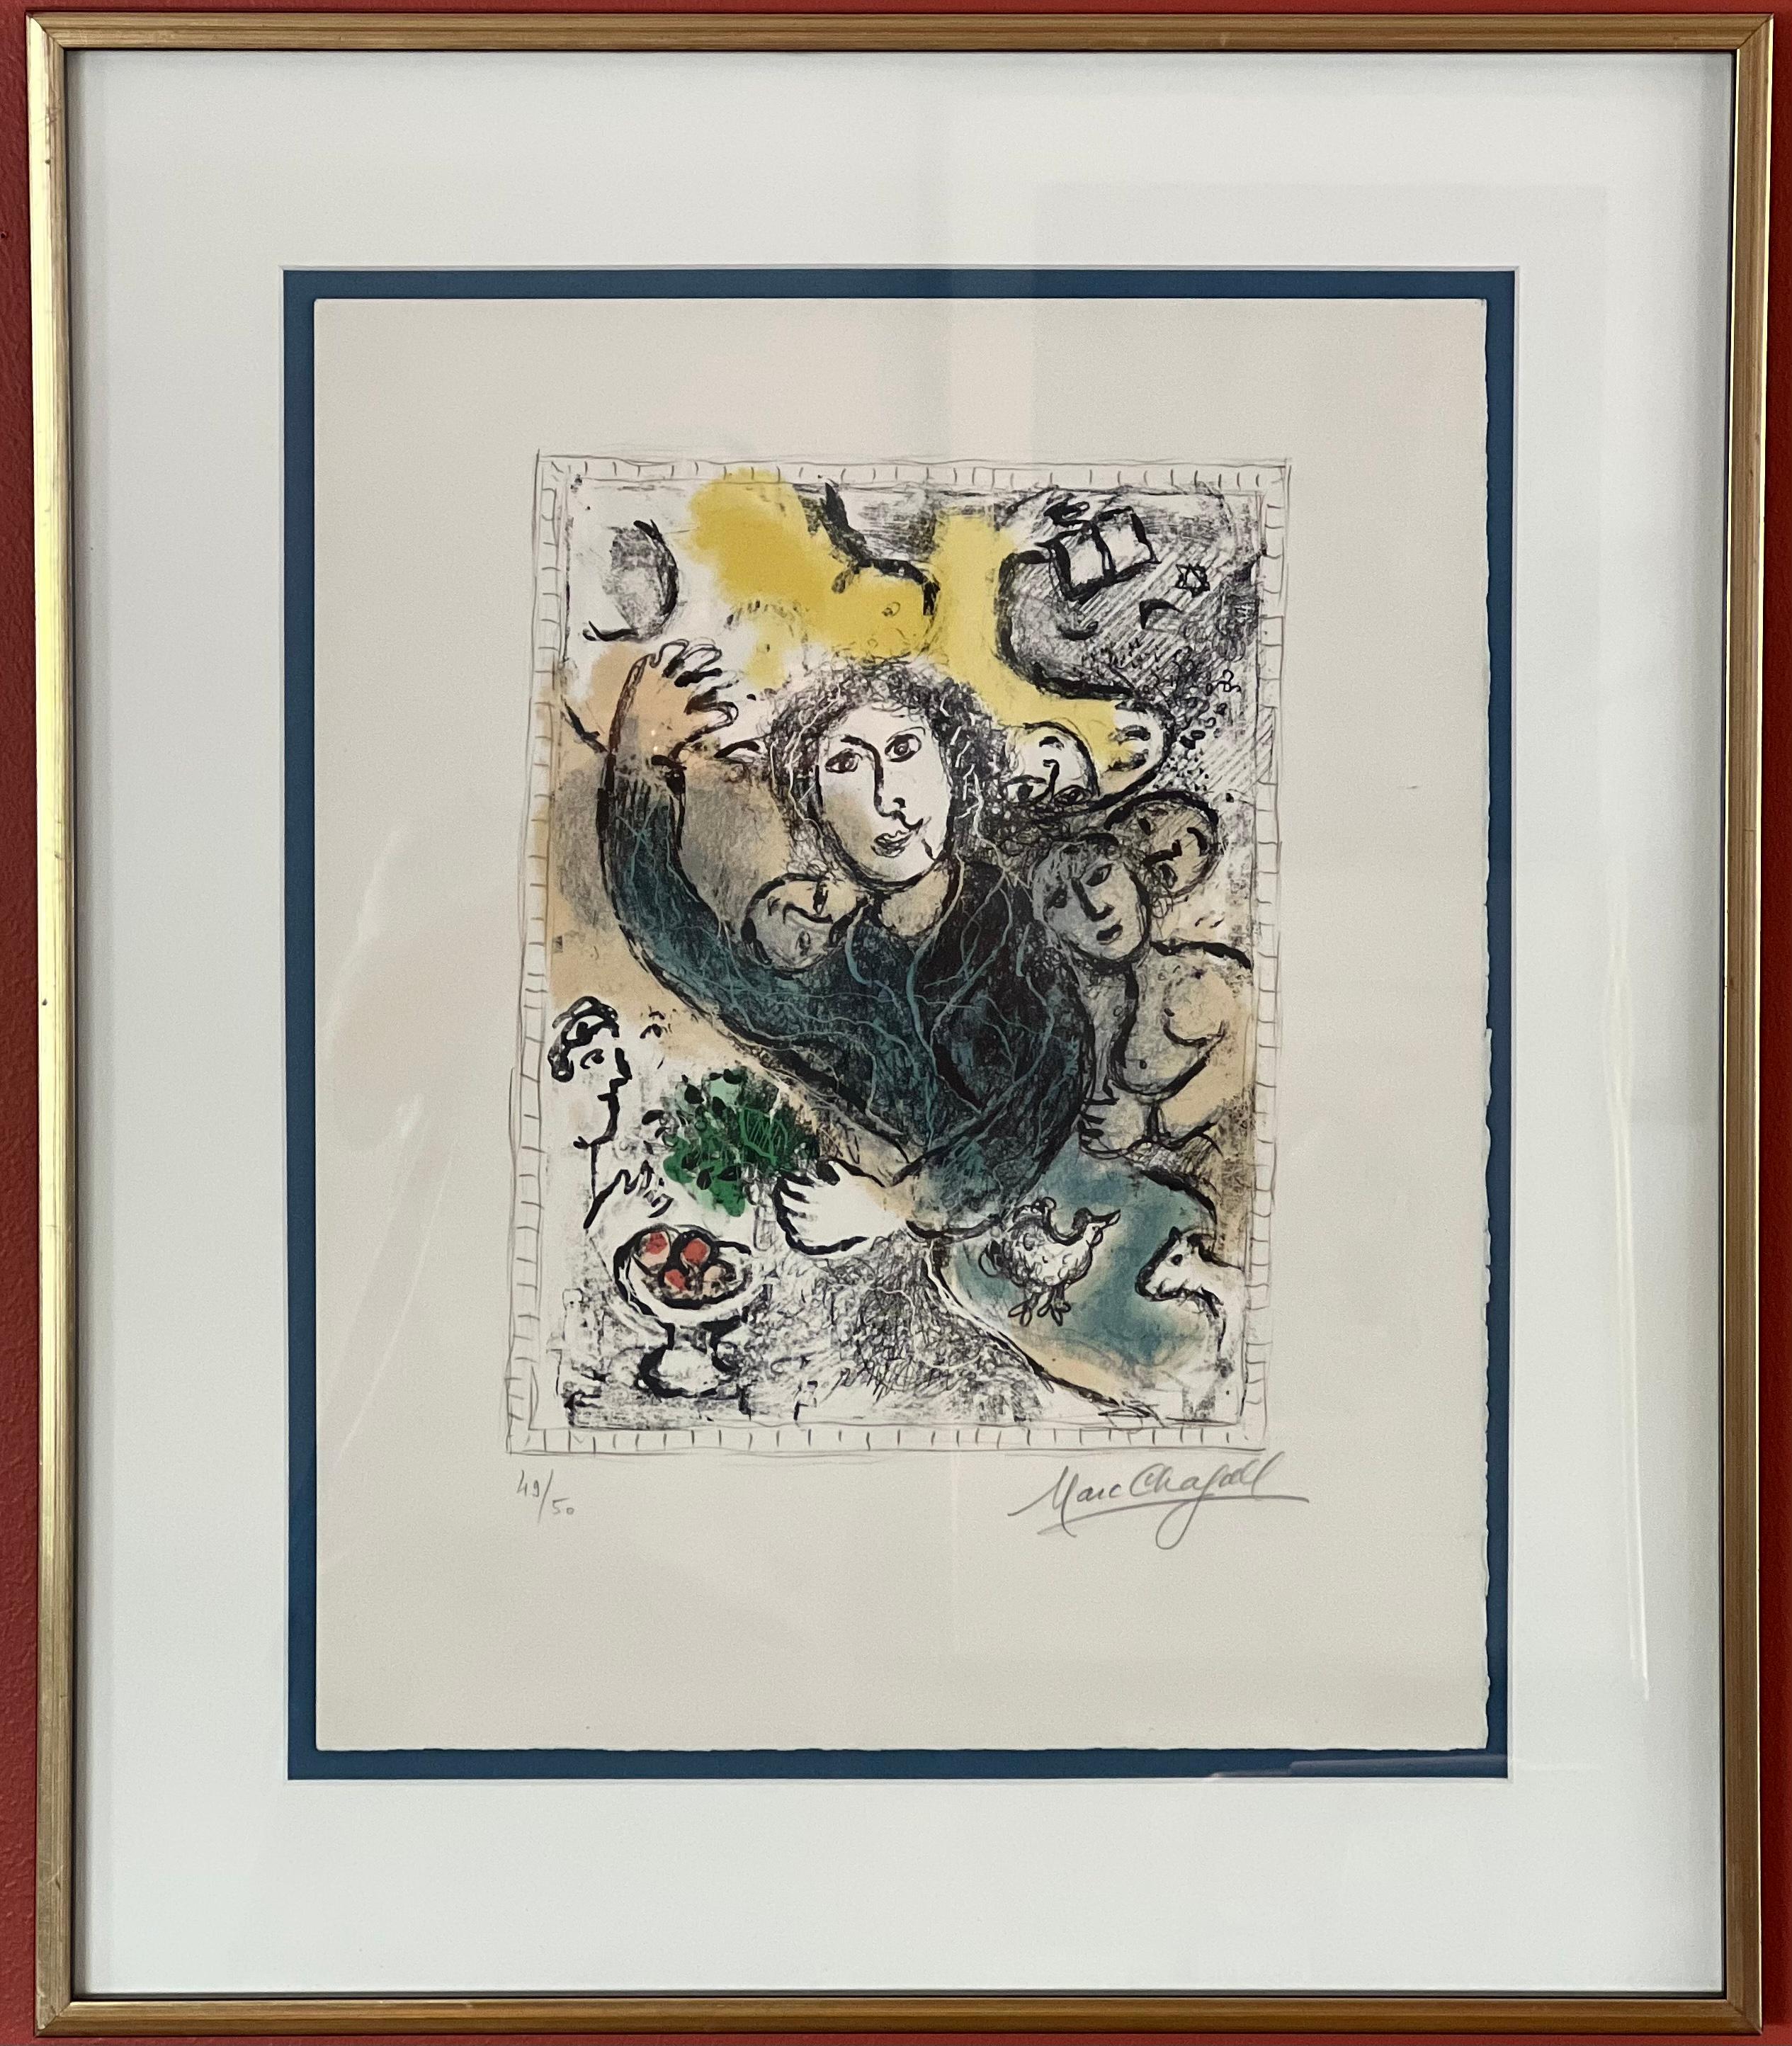 “L’Artiste II” by Marci Chagall (M.929)
Original lithograph printed at Ateliers Mourlot, 1978, 49/50
Signed and numbered by the artist
Image 10 x 13 in. 15.5 x 19 in with margin

LITHOGRAPH printed in colors, 1978, signed in and numbered 49/50